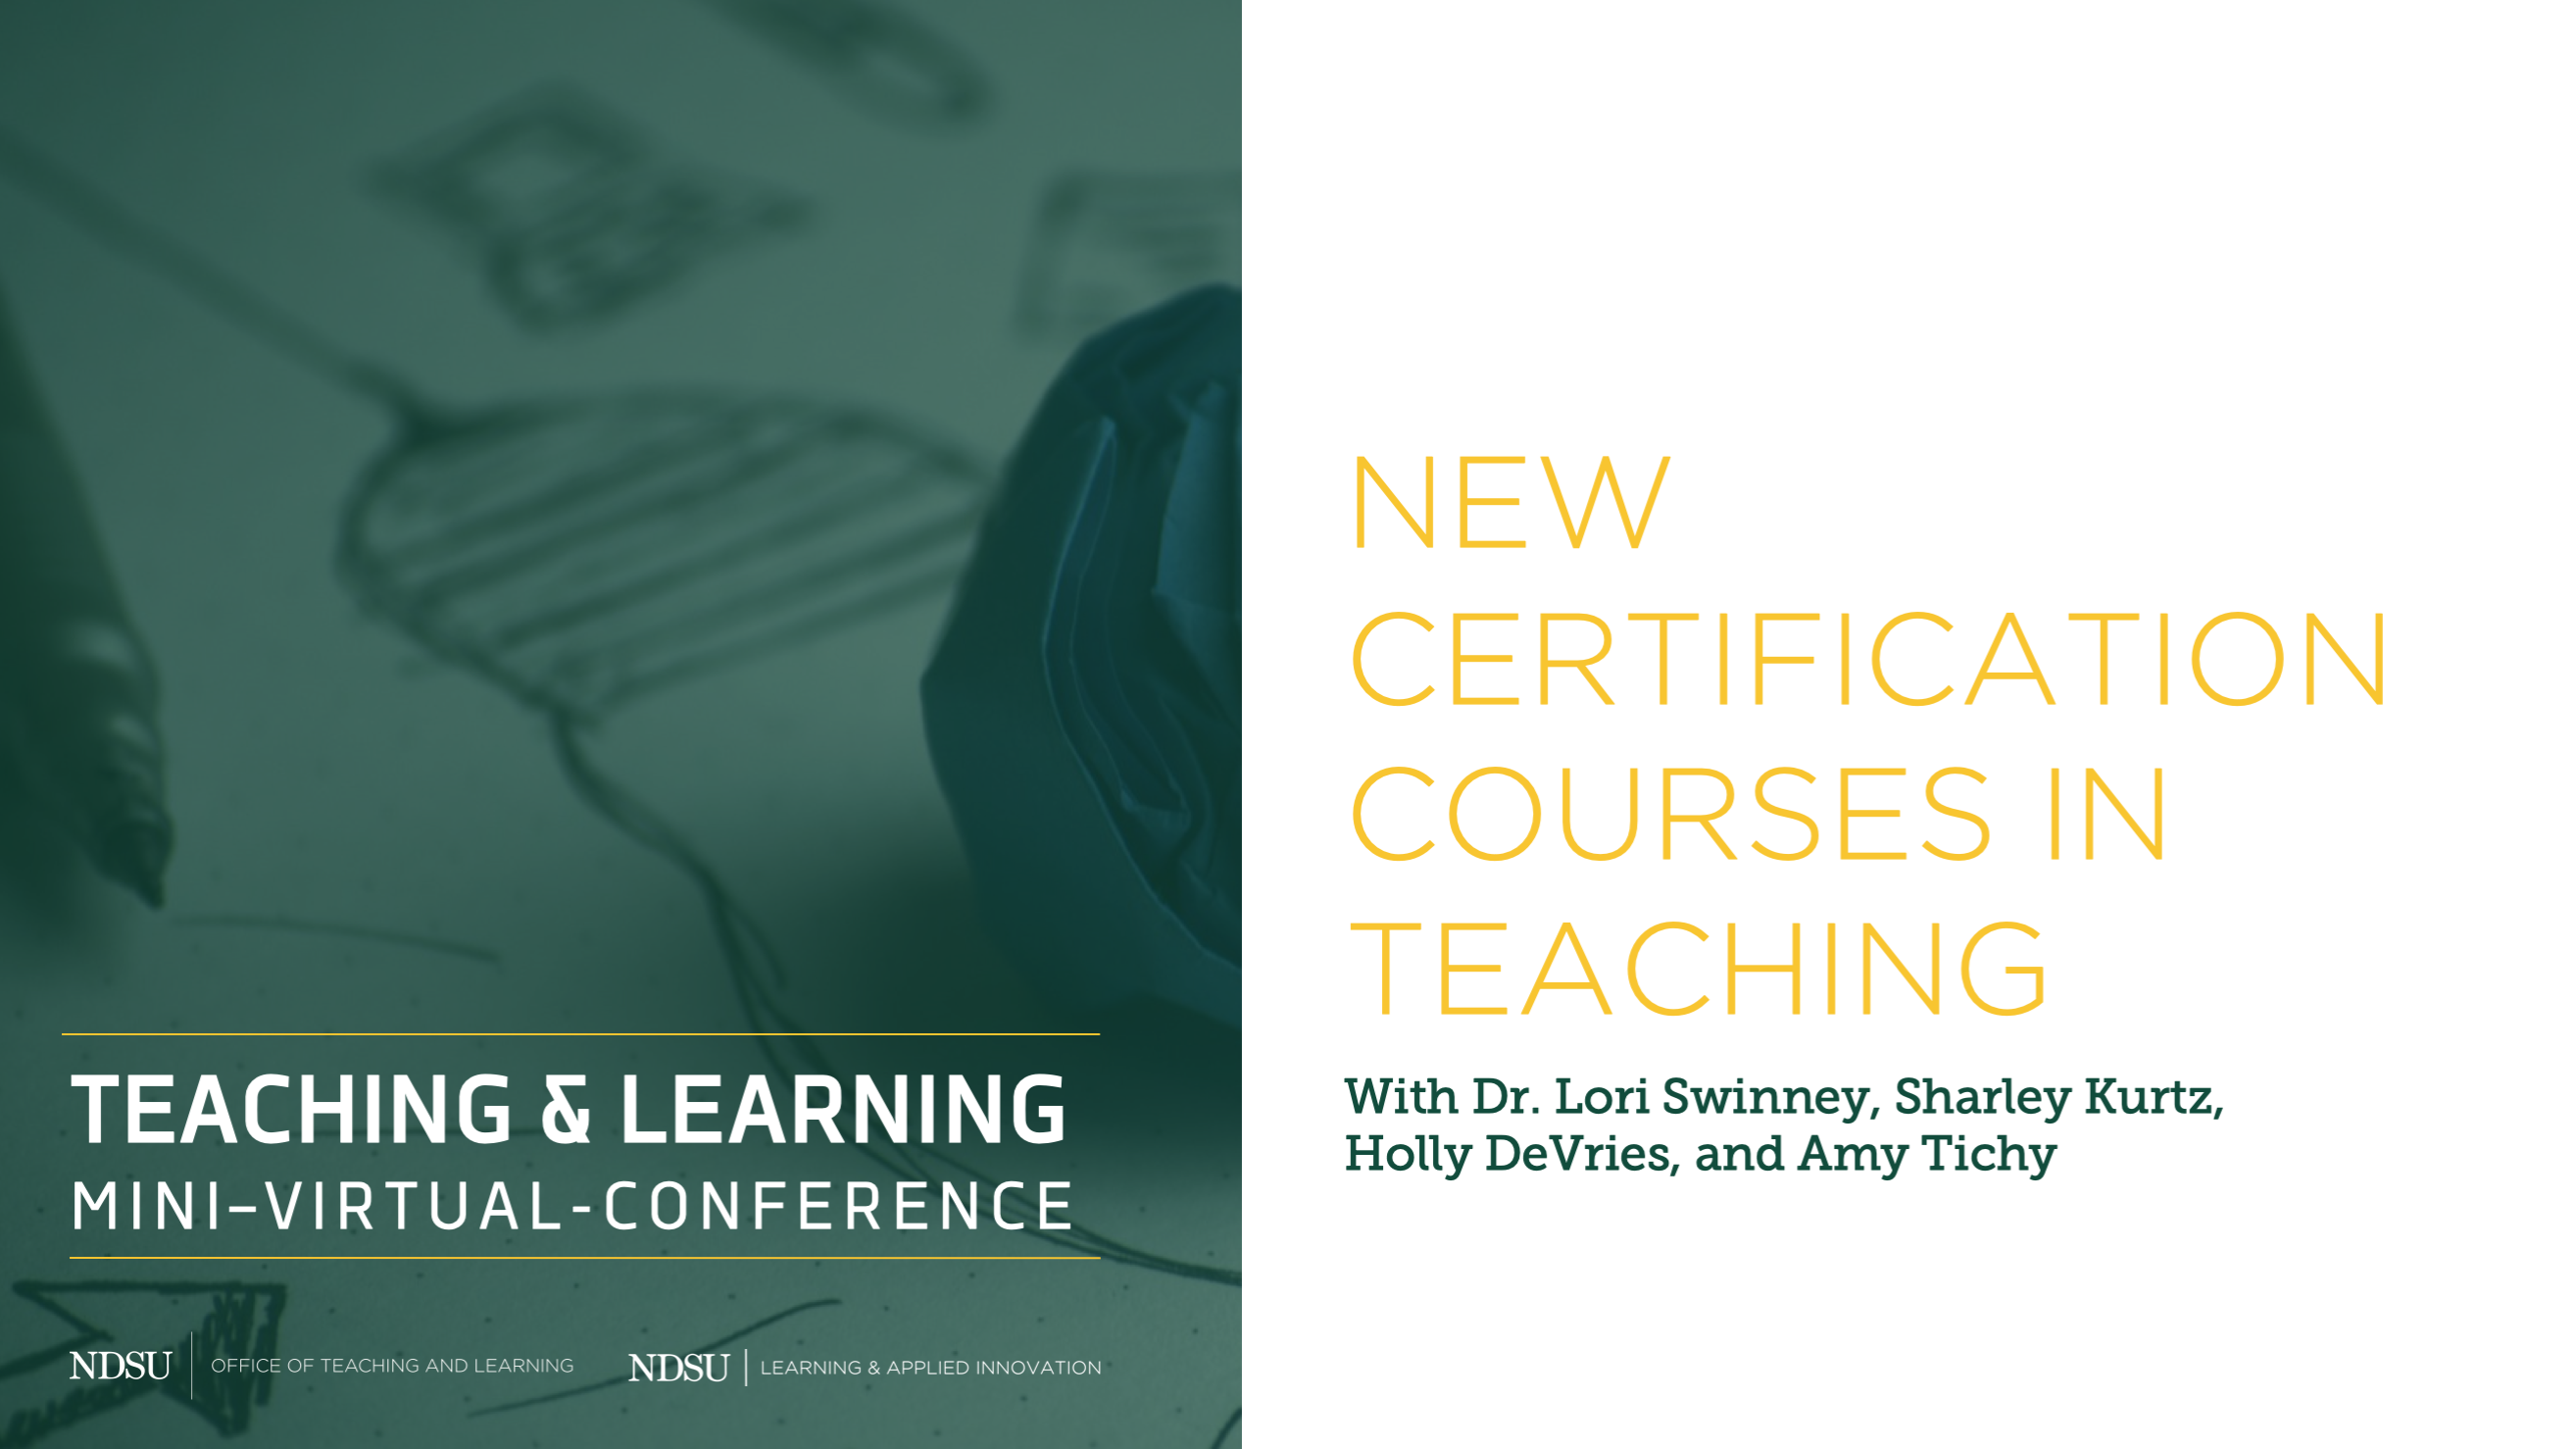 New Certificate Courses in Teaching